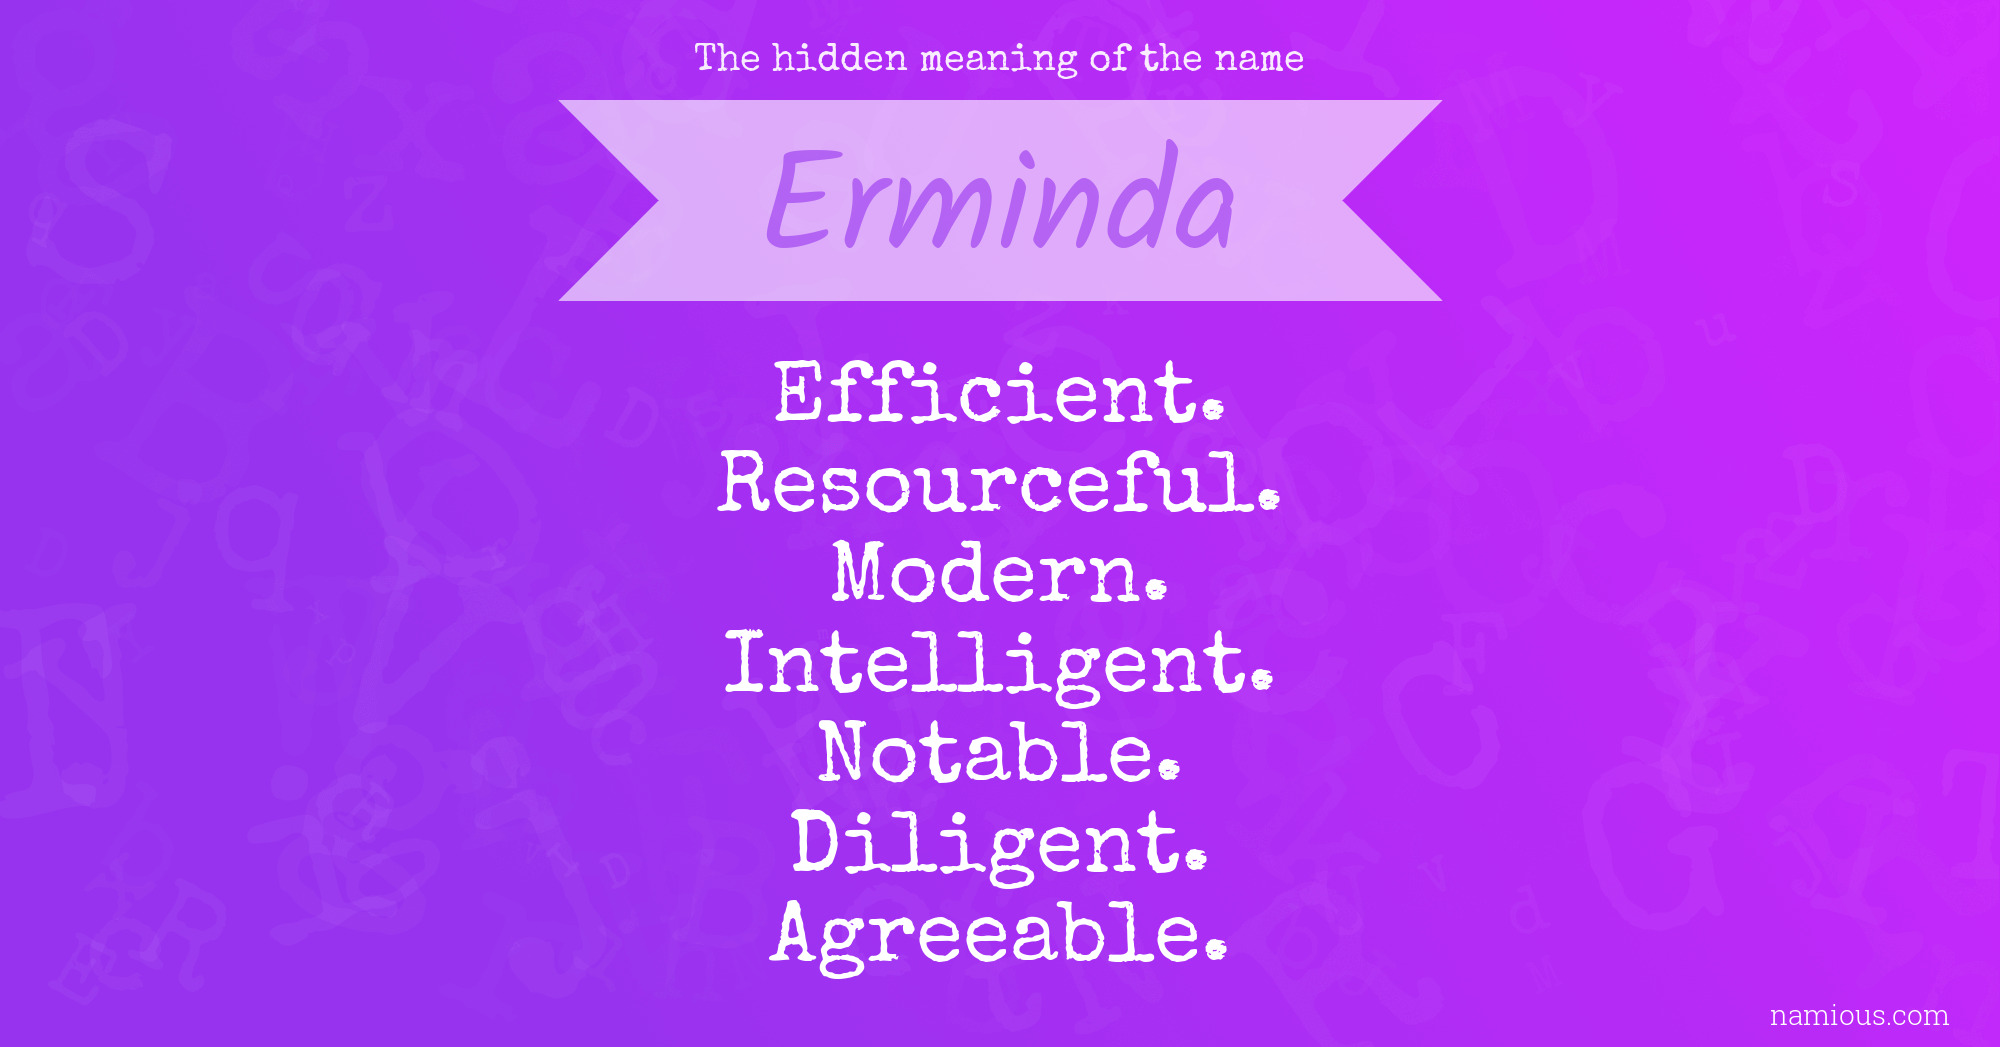 The hidden meaning of the name Erminda